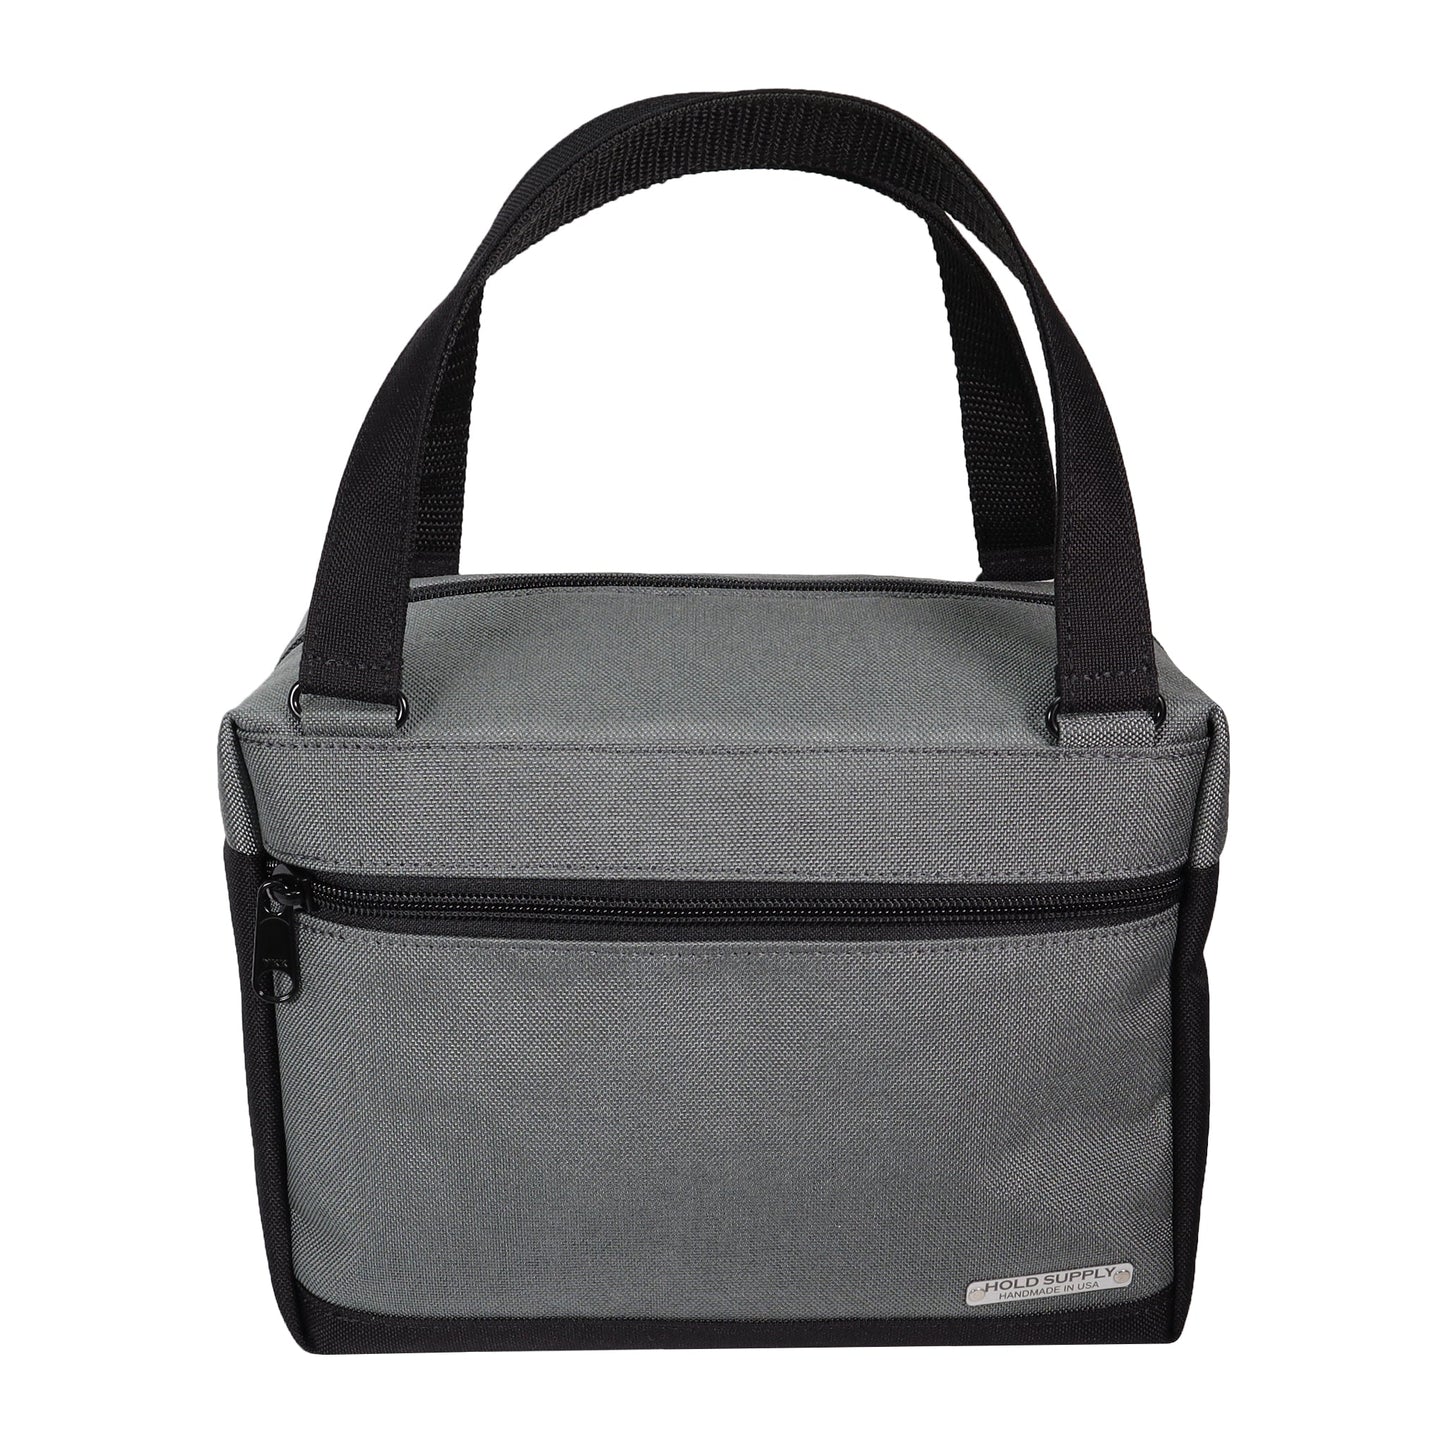 Gray and Black Insulated Canvas Zippered Lunch Bag